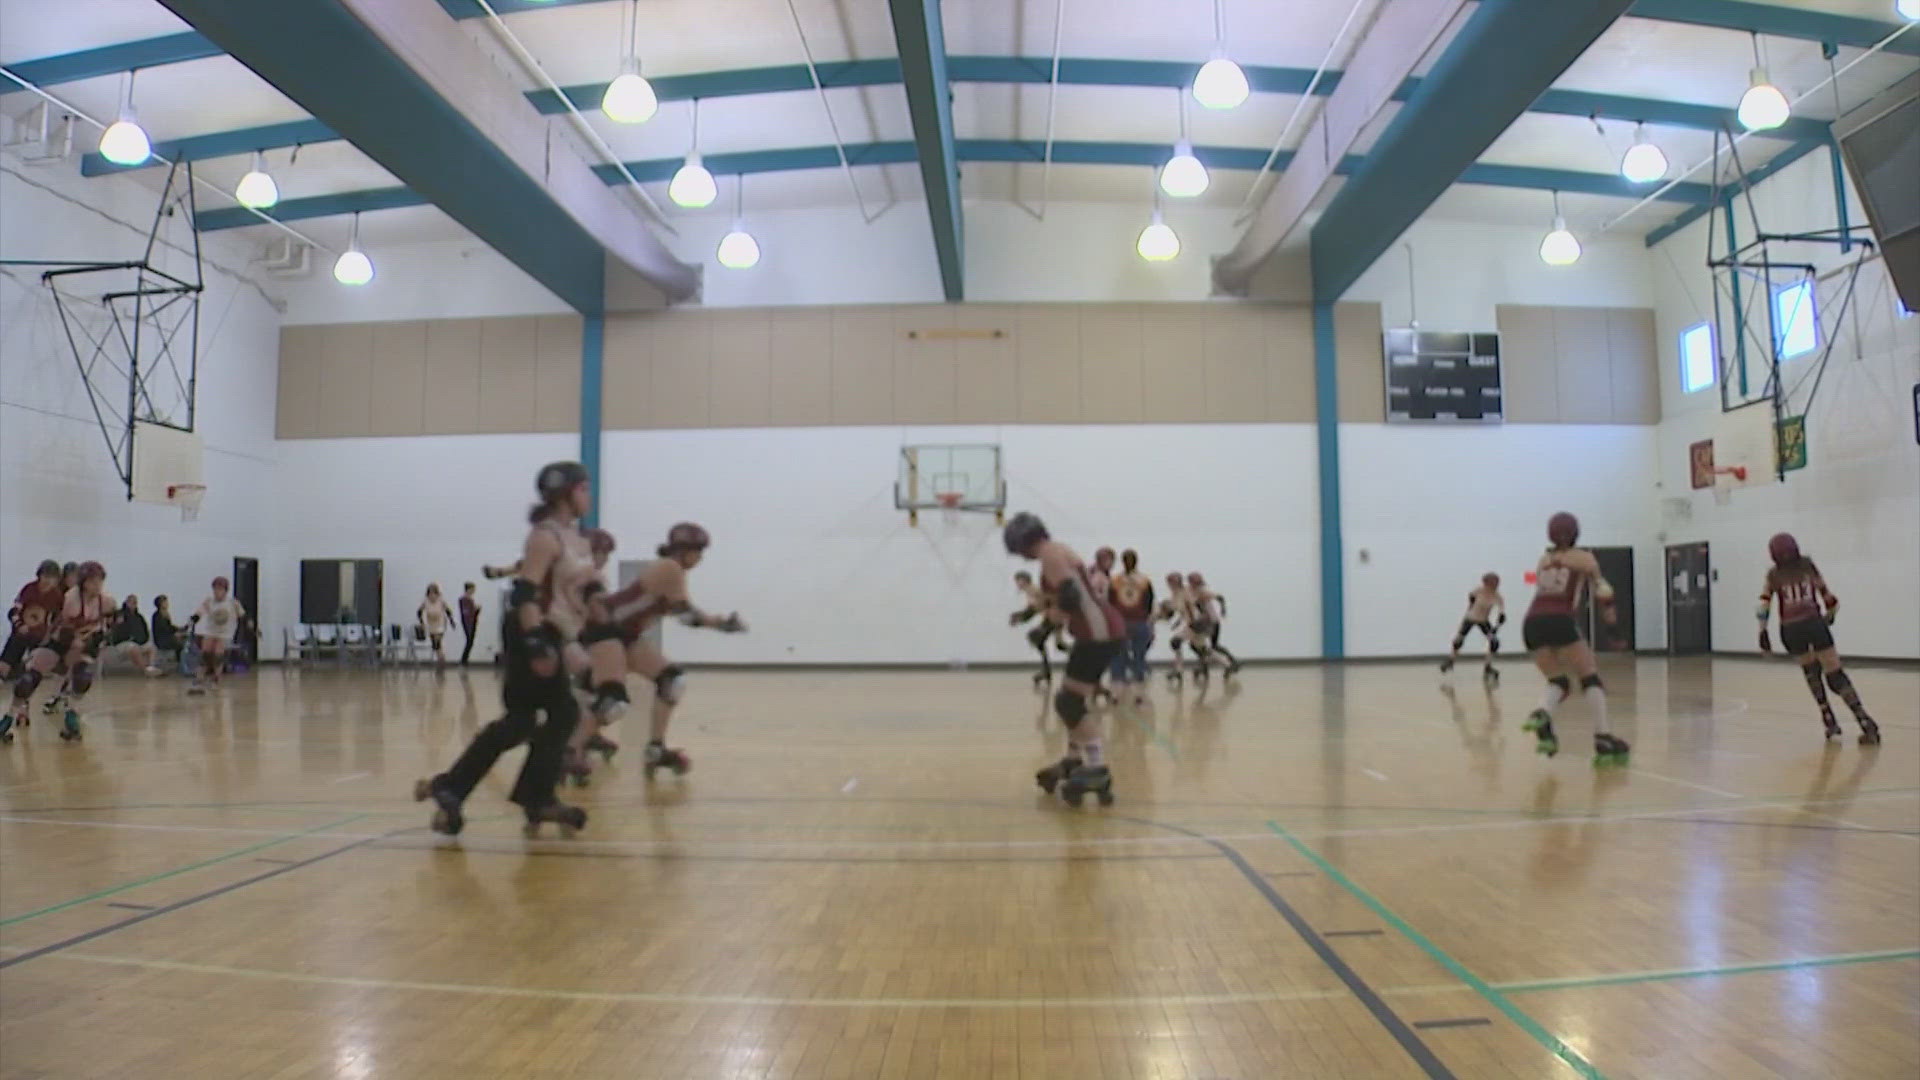 The Tomorrowland Junior Roller Derby League is hoping to raise money to find a new place to practice as they are losing their space to make more pickleball courts